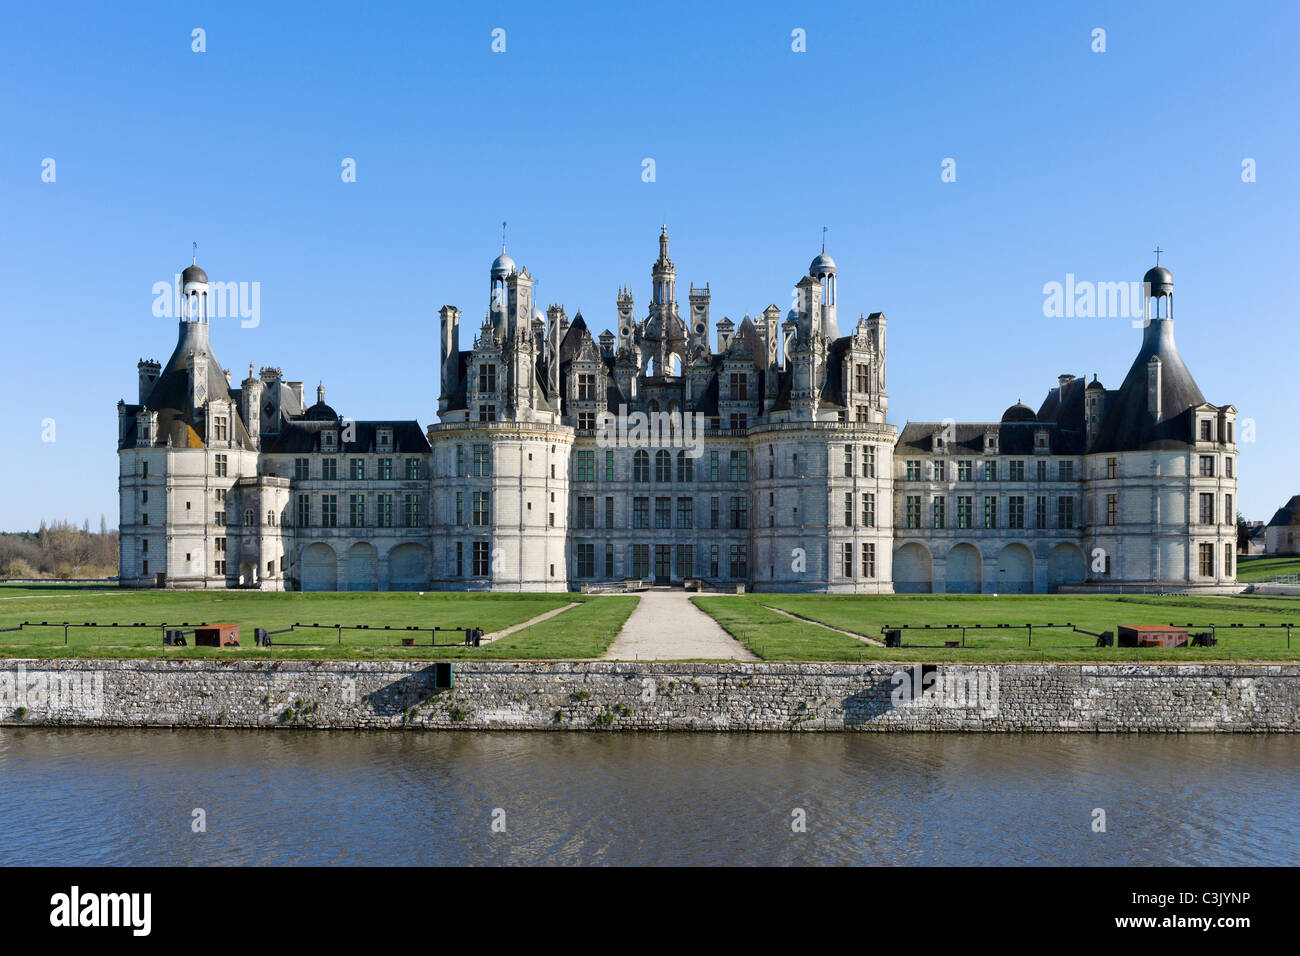 The north west facade of the Chateau de Chambord, Loire Valley, Touraine, France Stock Photo